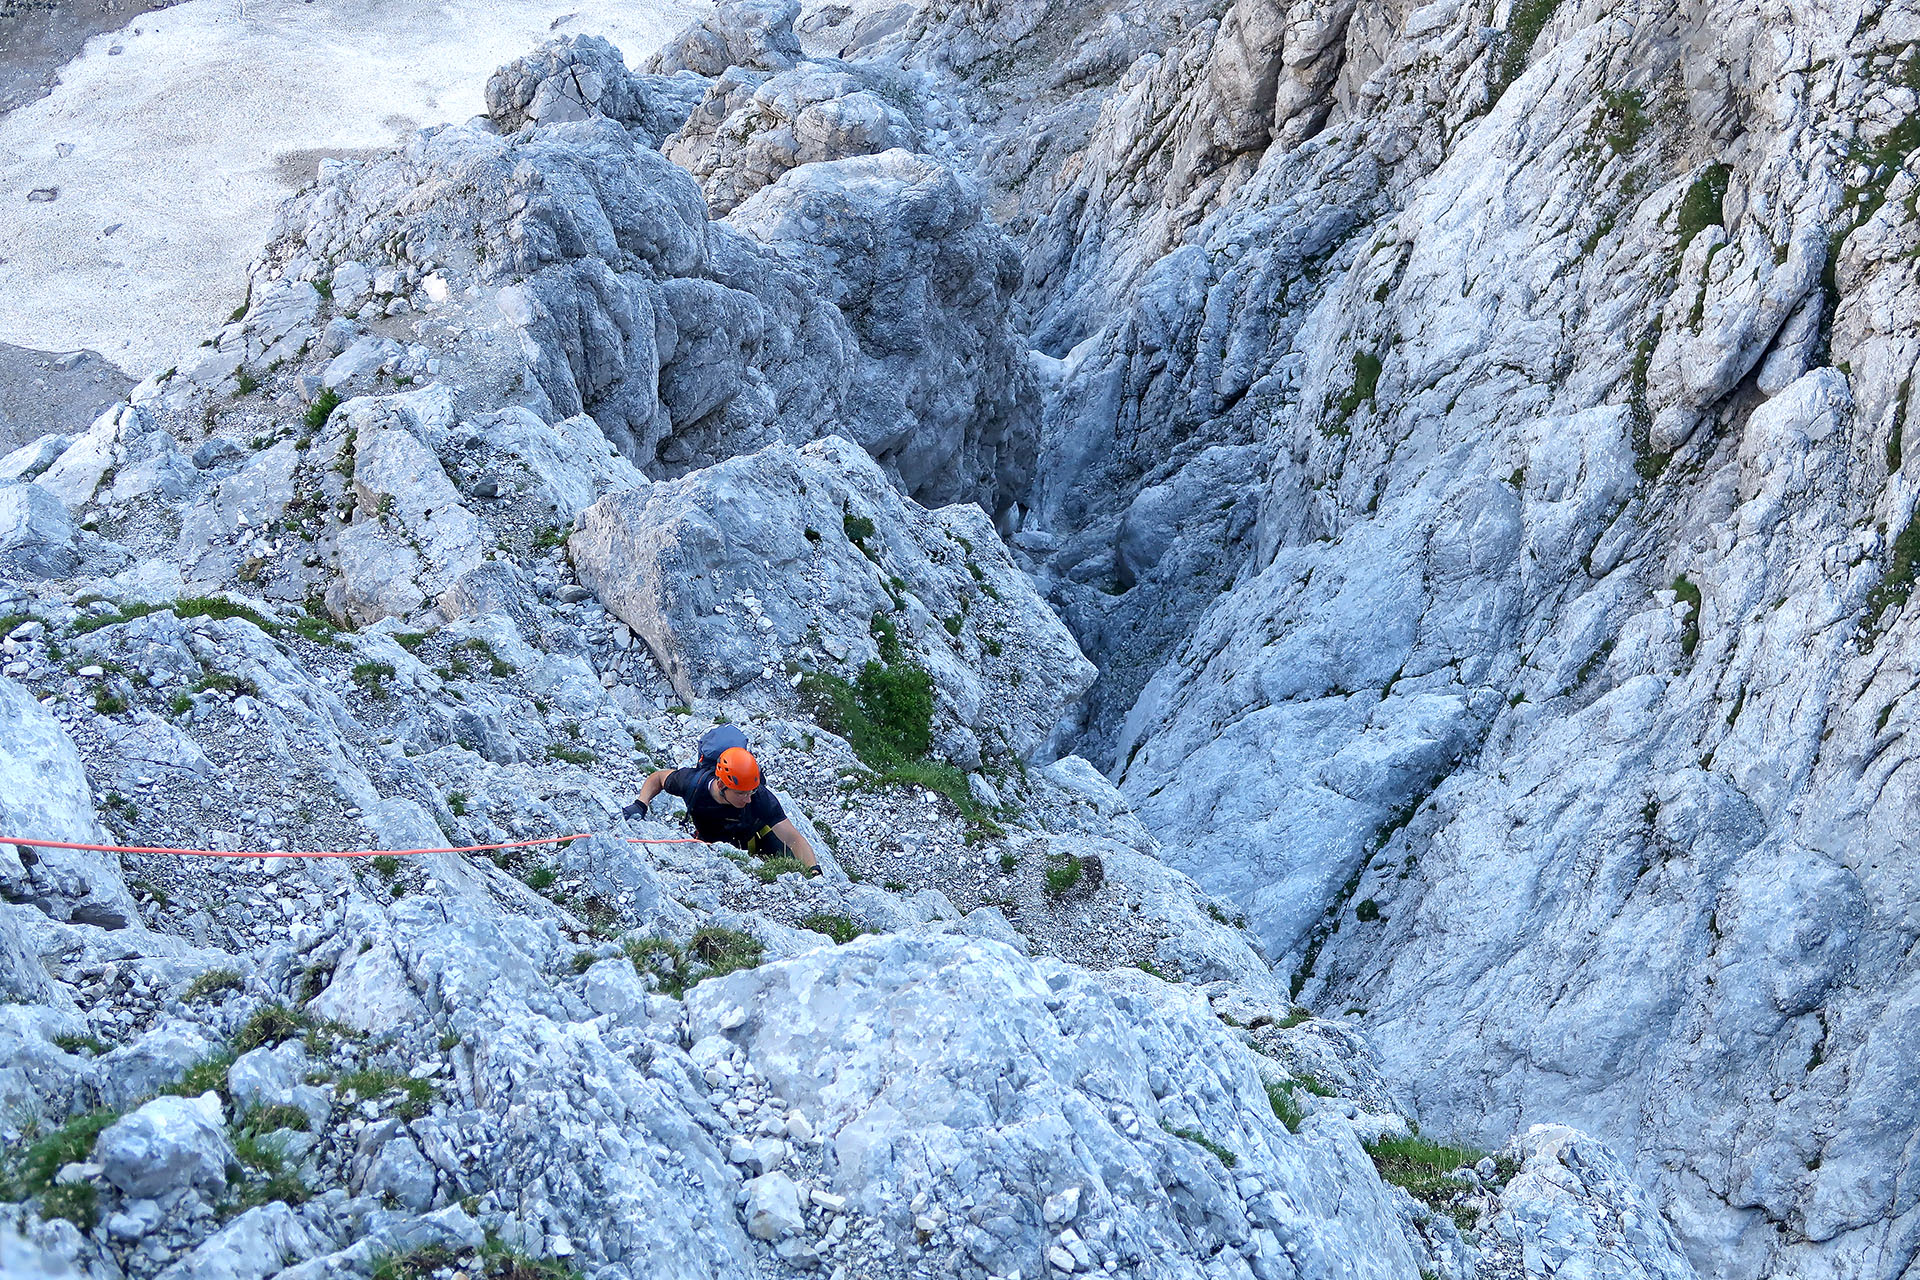 Guidied tour with IFMGA mountain guide in Long german route in Triglav north wall